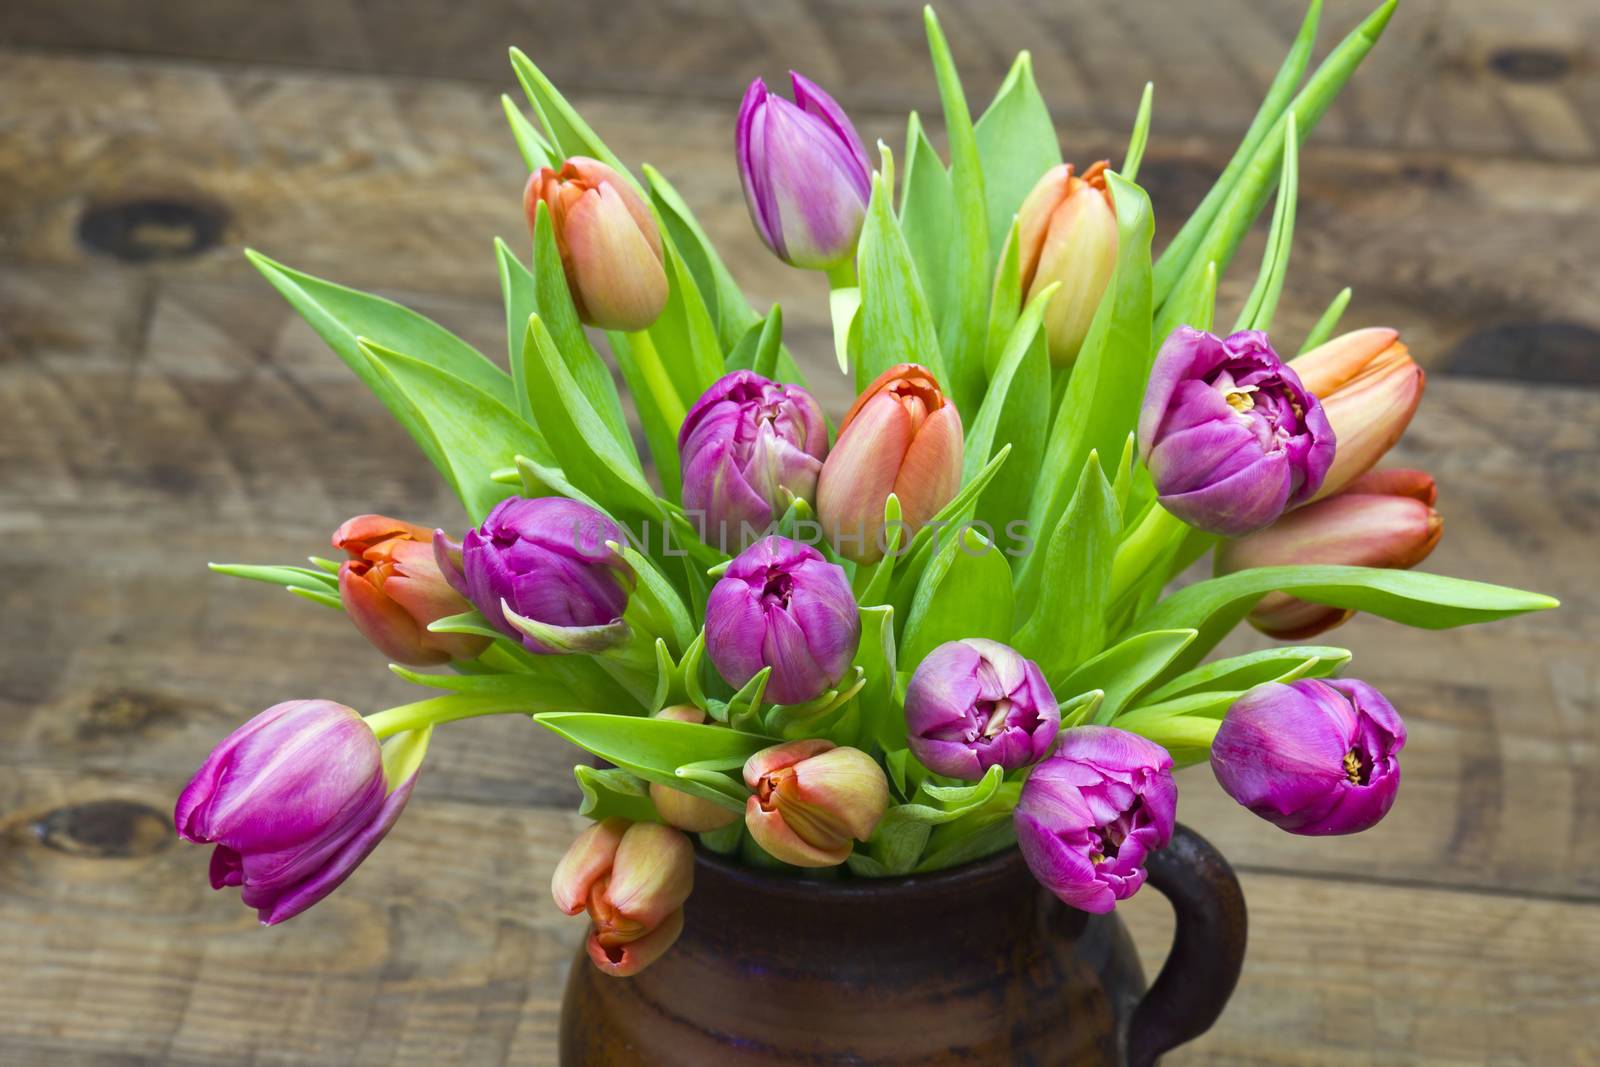 colourful tulips in a vase by miradrozdowski